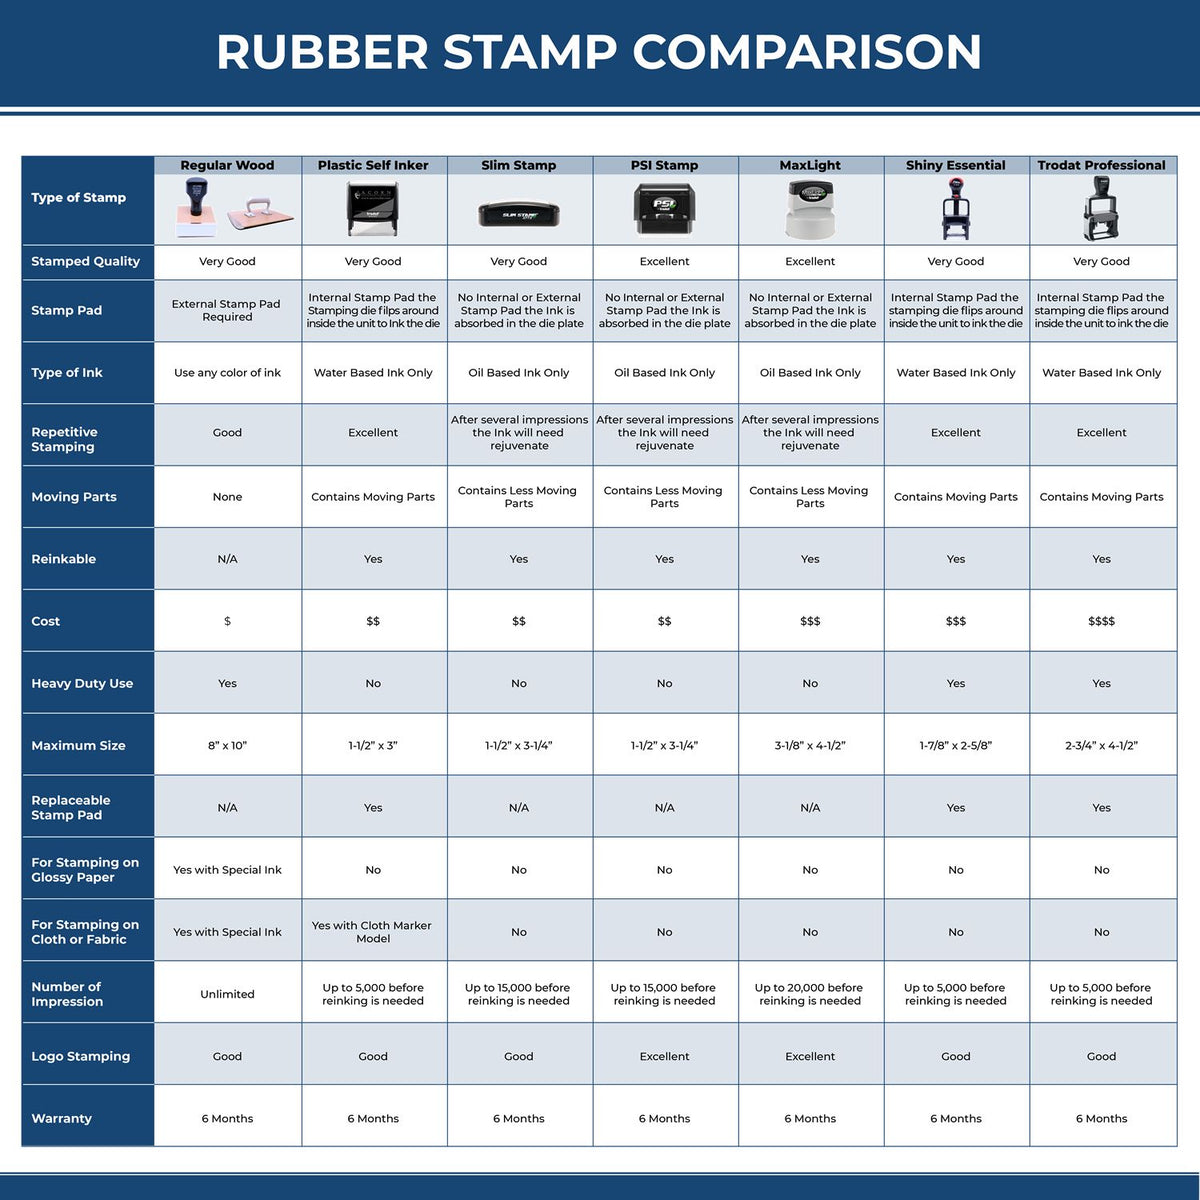 A comparison chart for the different types of mount models available for the Texas Professional Engineer Seal Stamp.